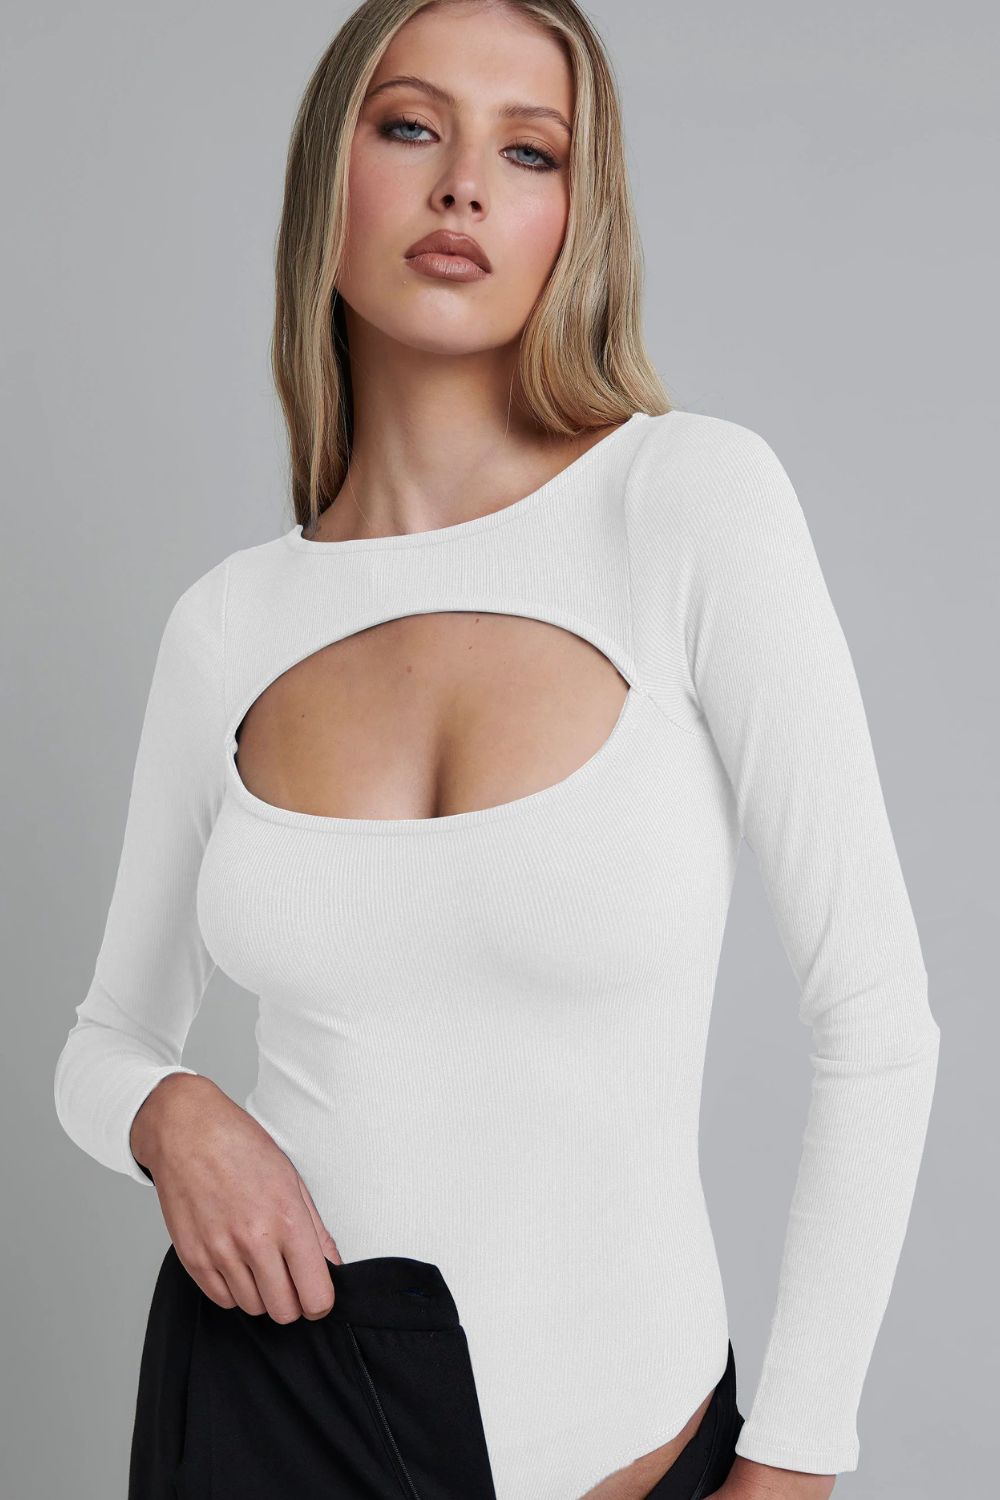 Cutout Ribbed Long Sleeve Bodysuit - Bodysuits - FITGGINS